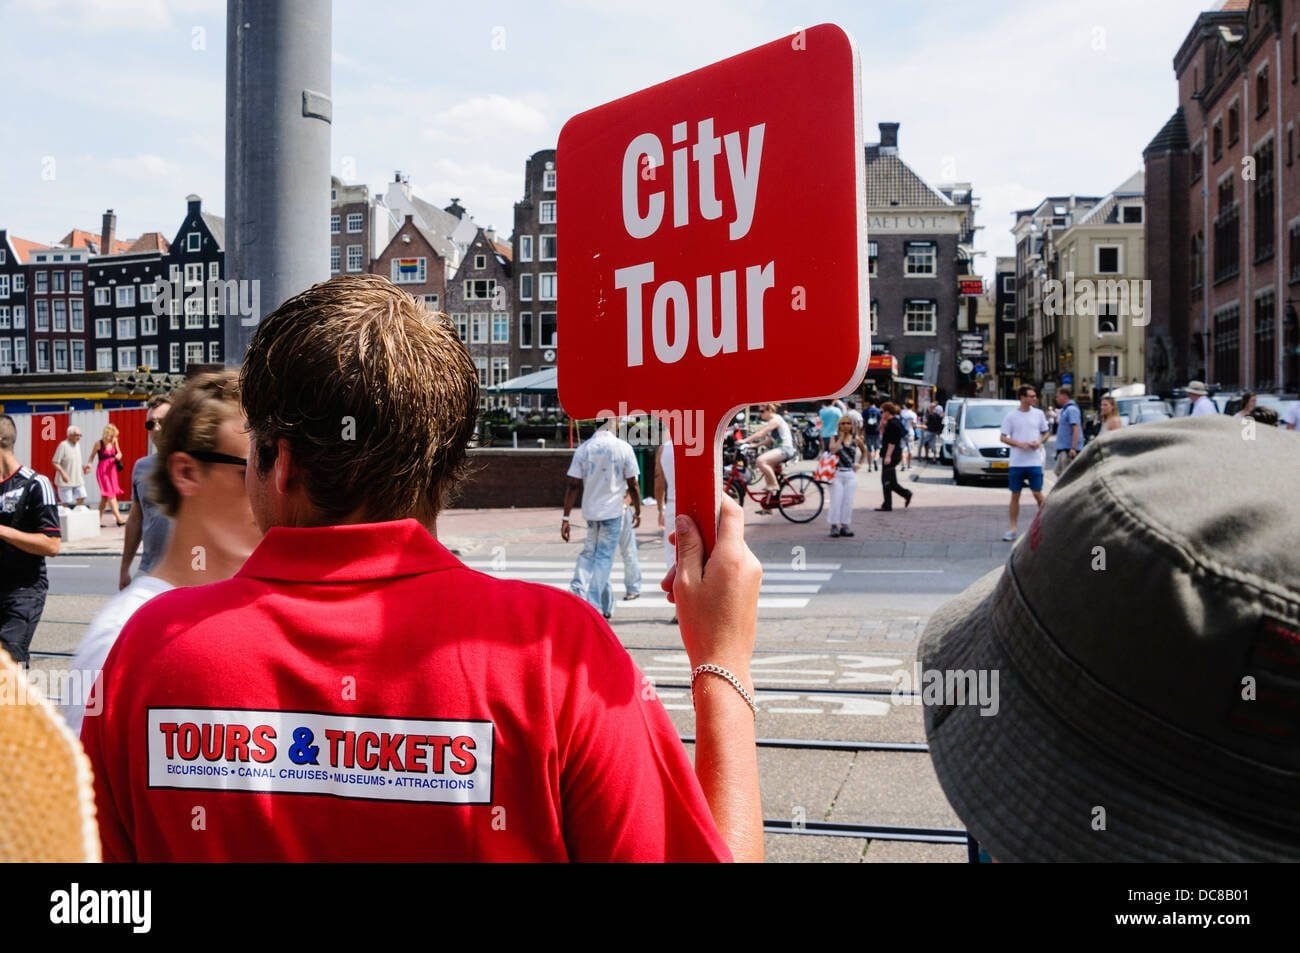 a-tour-guide-holds-a-sign-for-the-city-tour-in-amsterdam-DC8B01